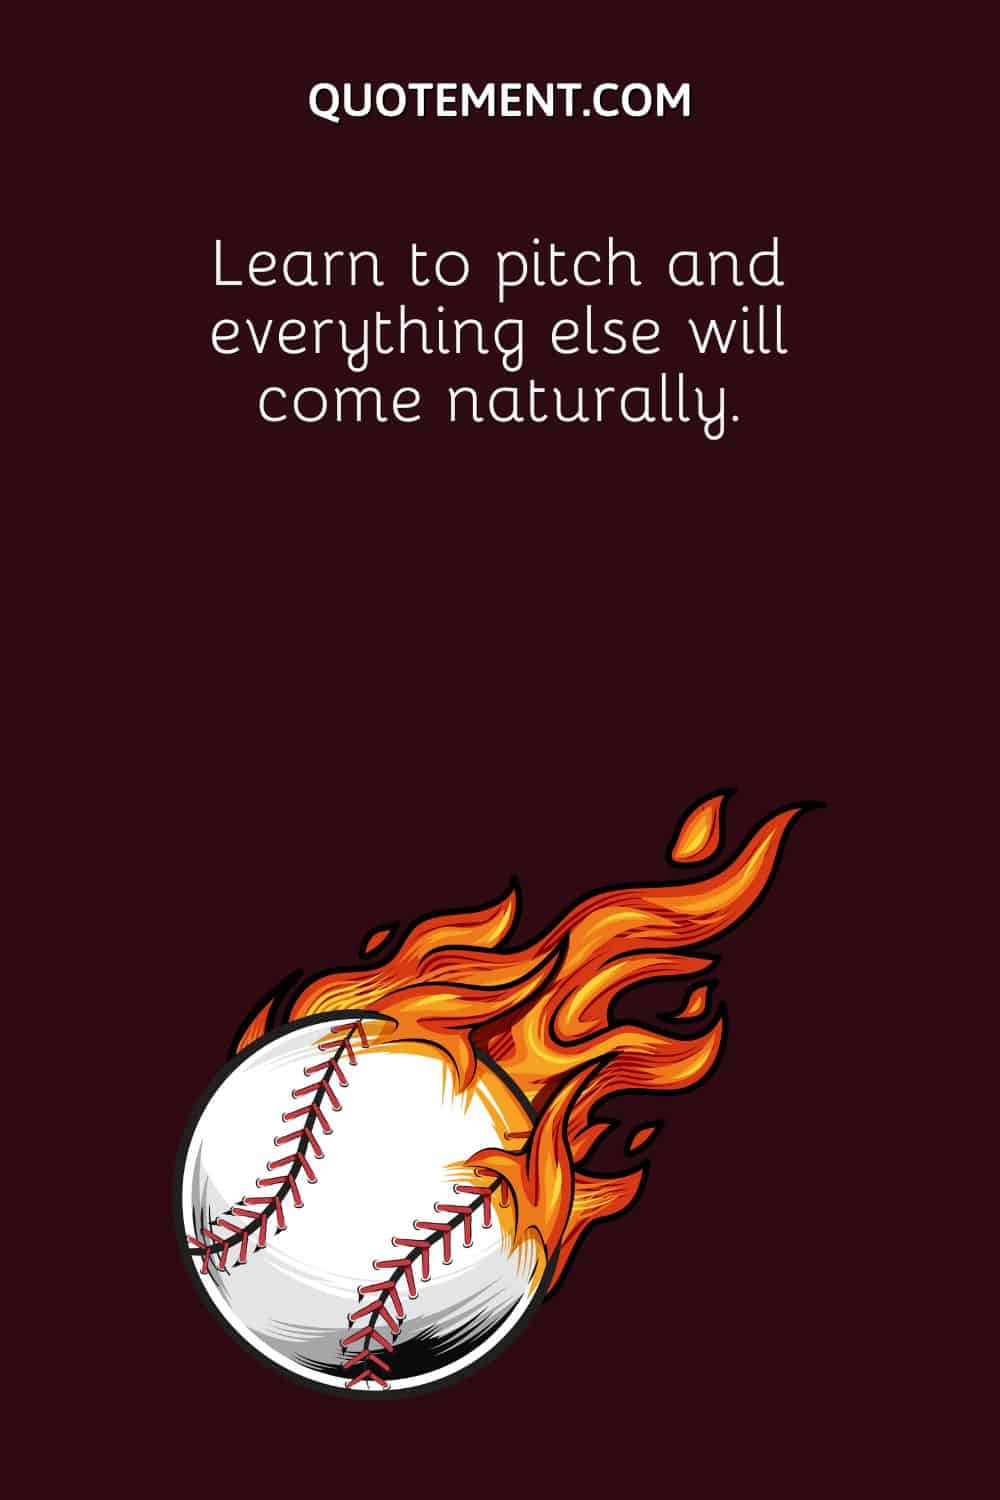 Learn to pitch and everything else will come naturally